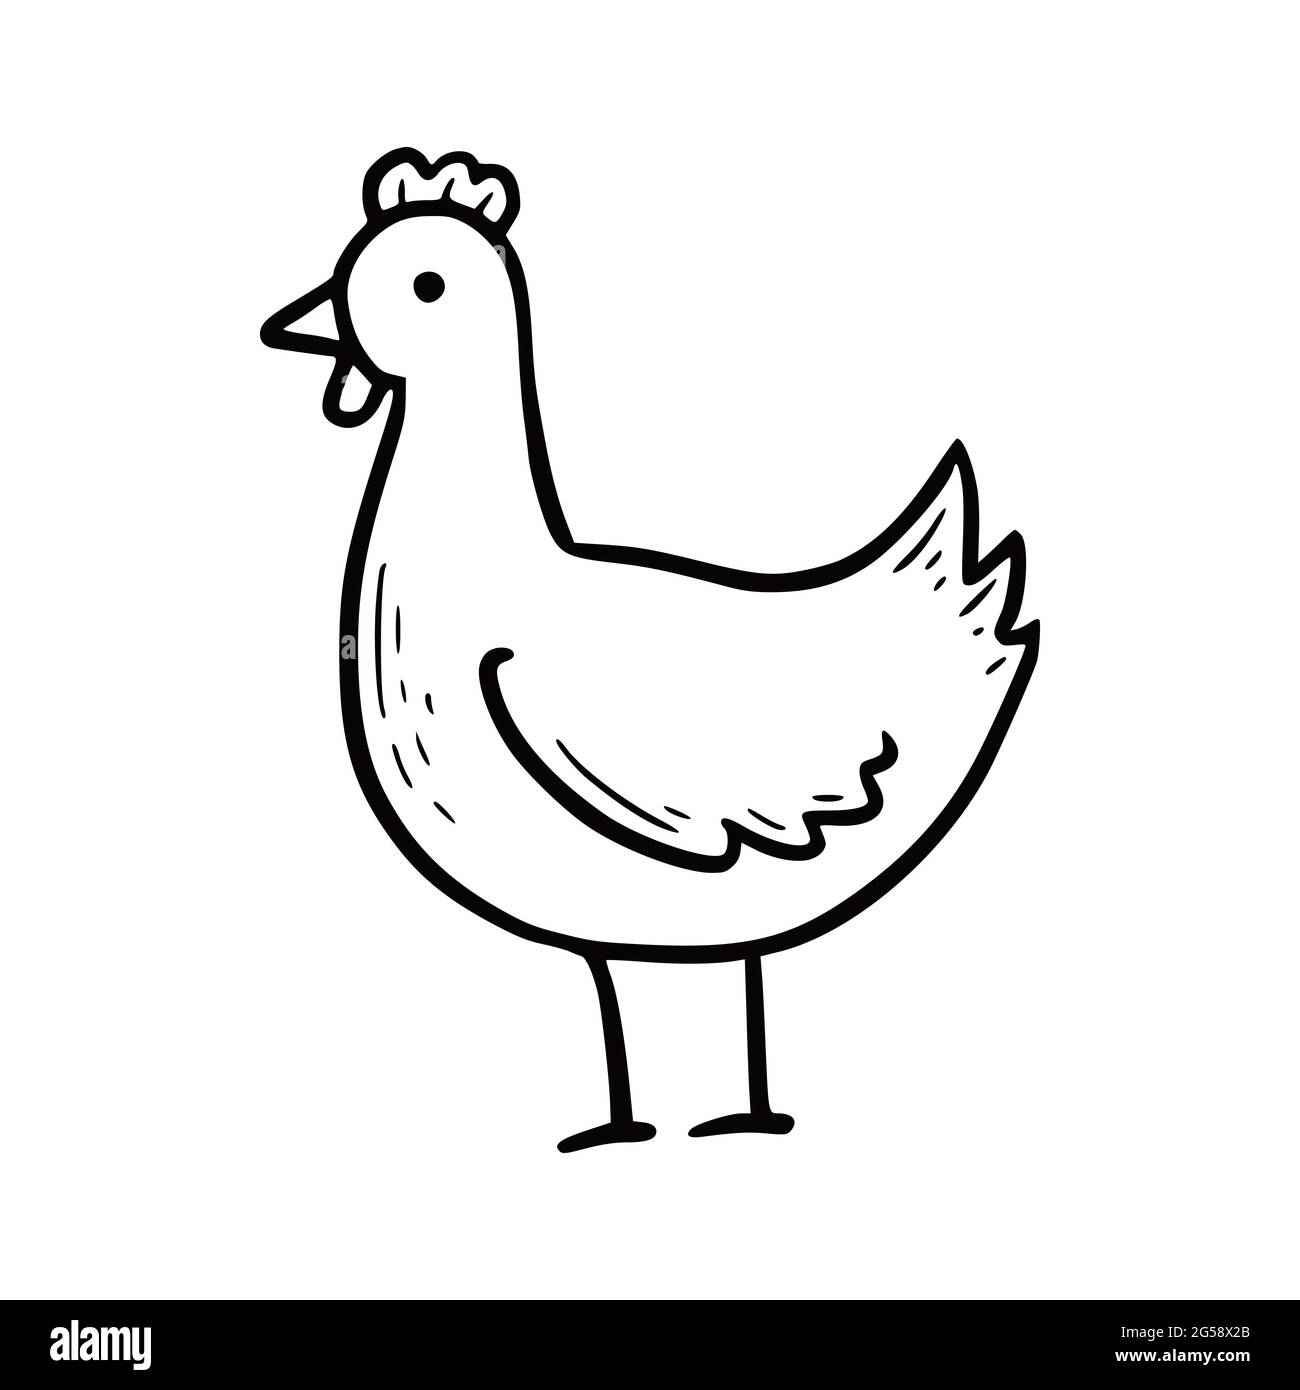 How to draw a hen  How to draw a chicken  YouTube